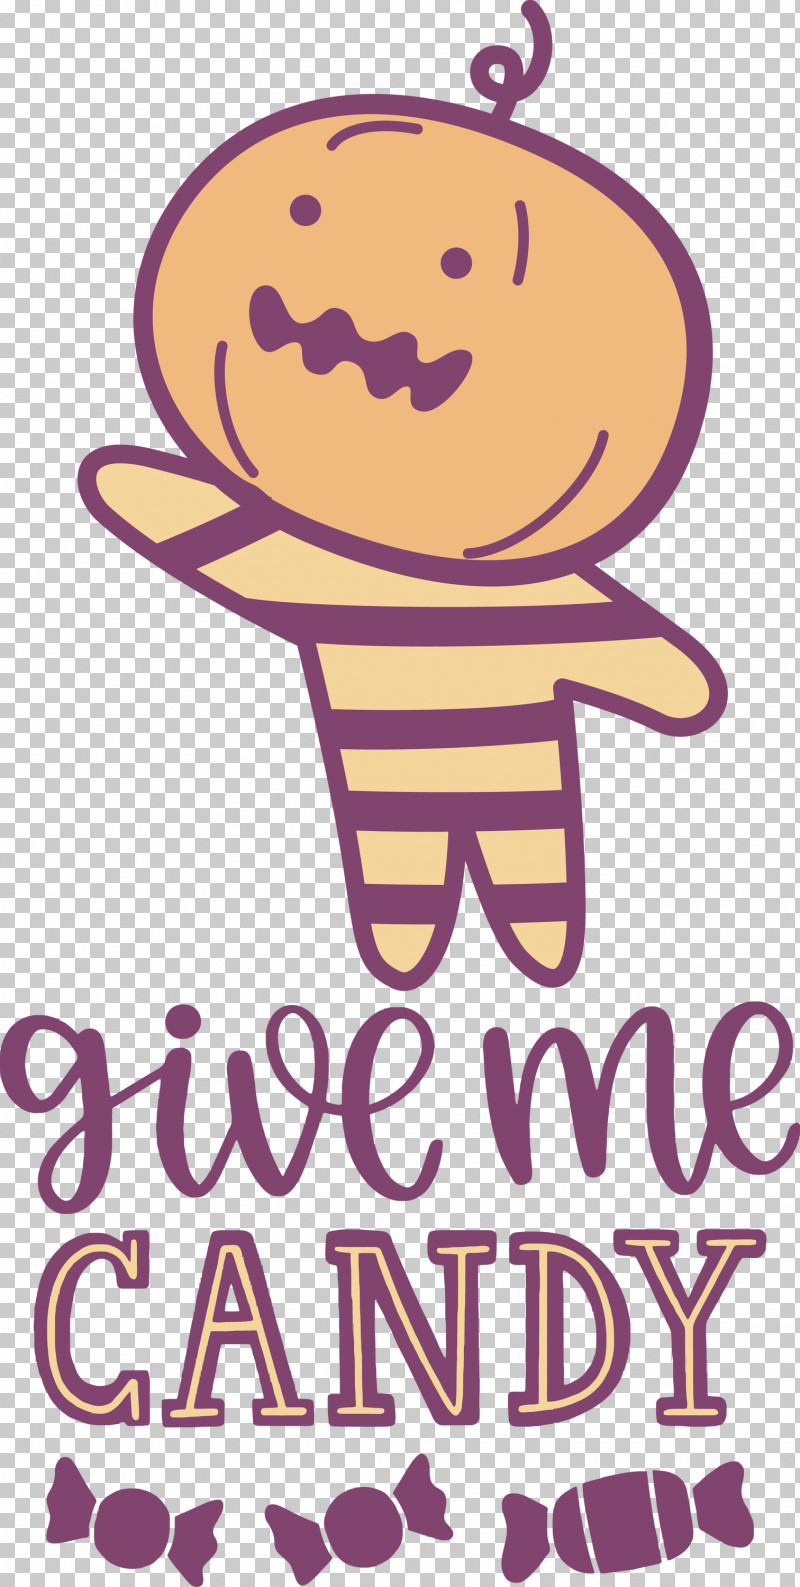 Give Me Candy Halloween Trick Or Treat PNG, Clipart, Cartoon, Fan Art, Give Me Candy, Halloween, Indie Art Free PNG Download